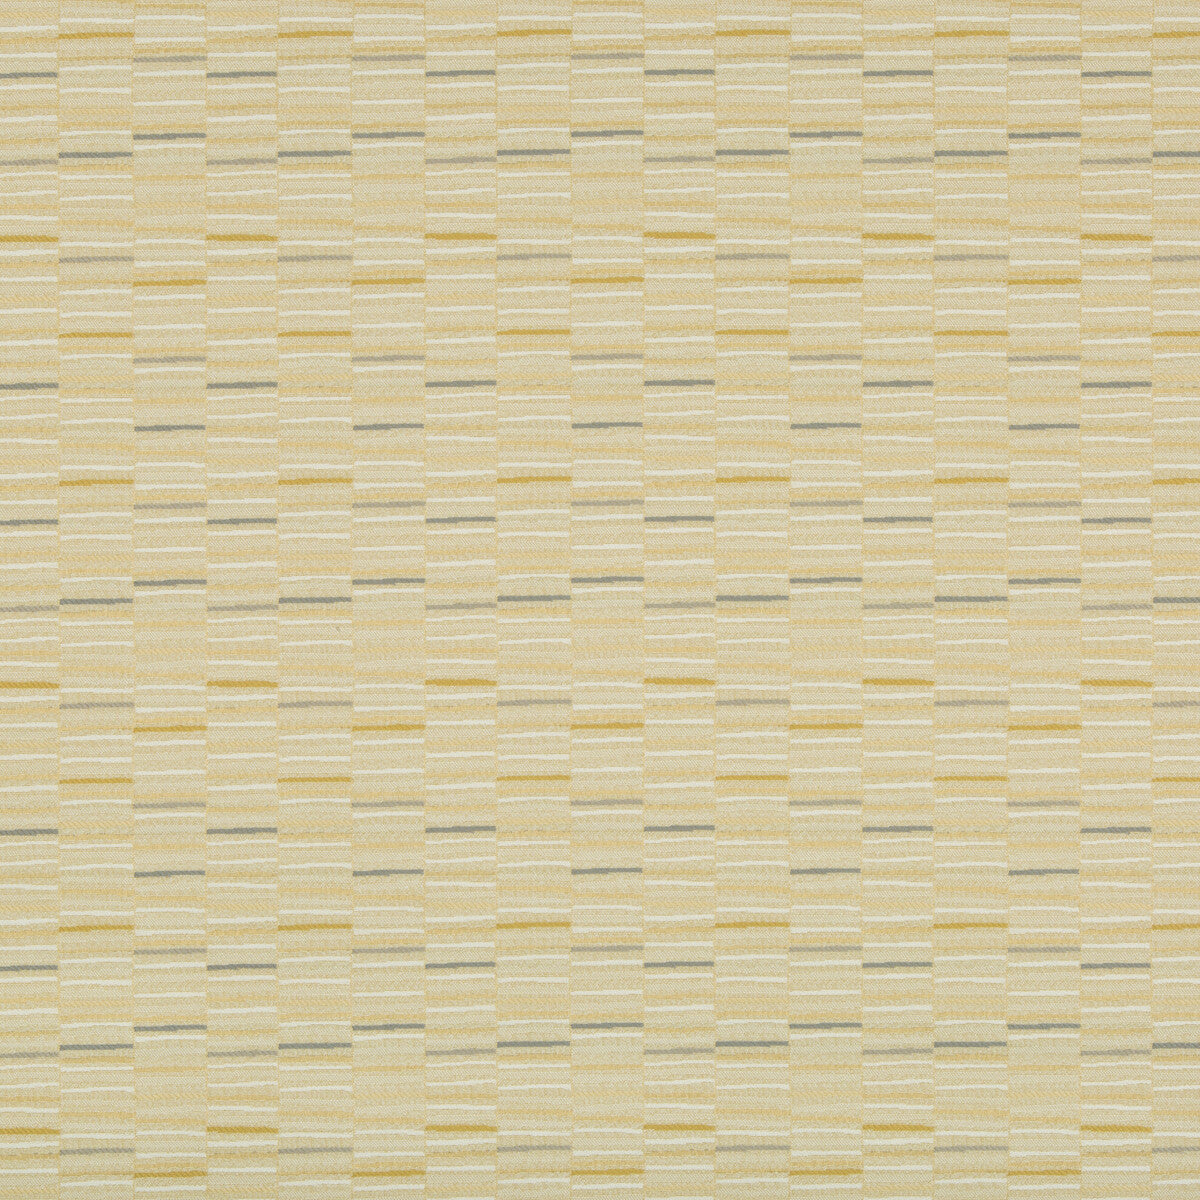 Lined Up fabric in beeswax color - pattern 35085.411.0 - by Kravet Contract in the Gis Crypton collection